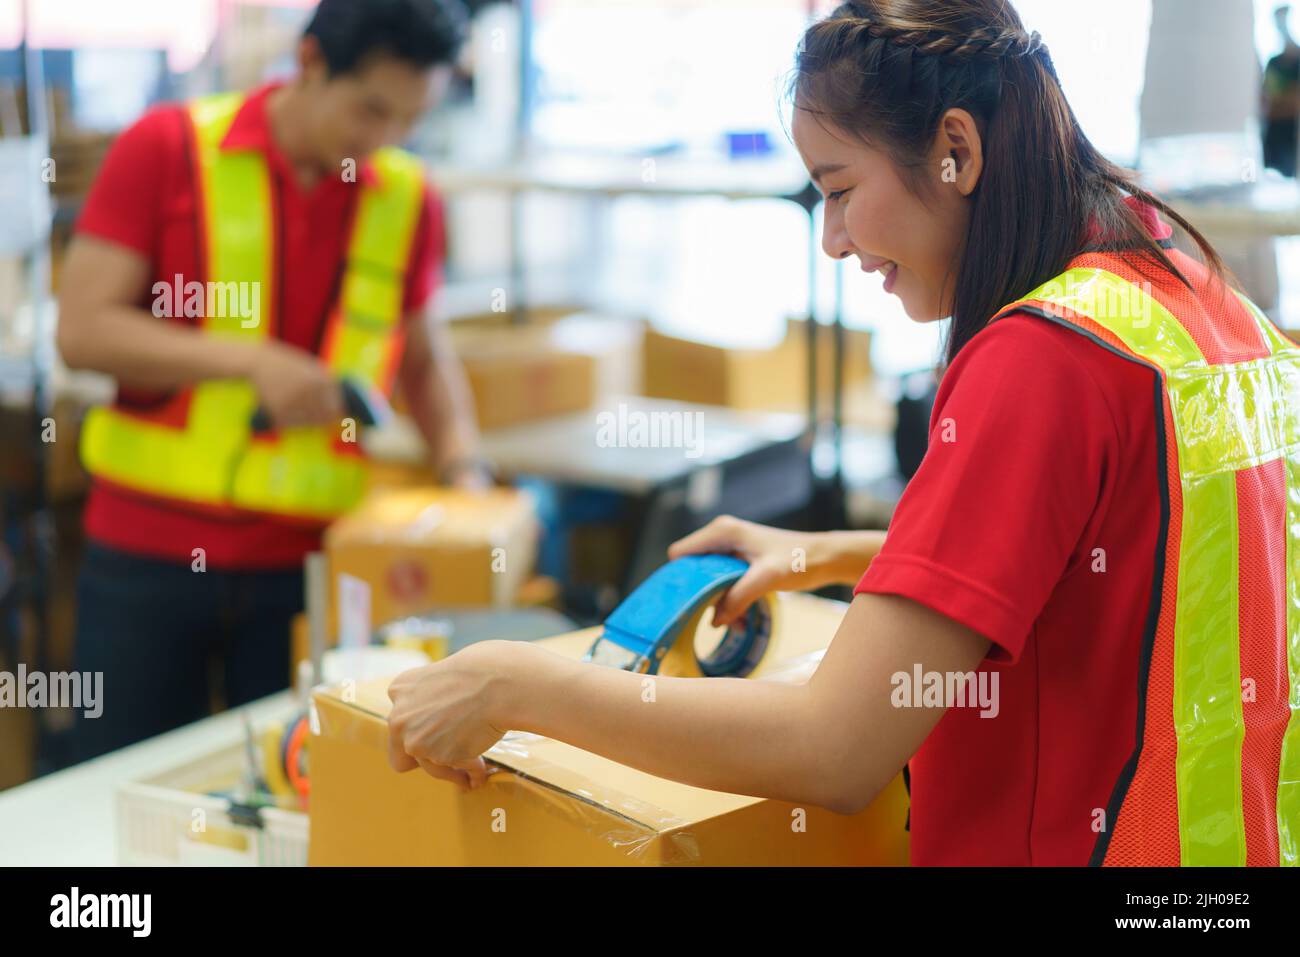 Asian female worker packing cardboard box with tape gun dispenser in warehouse. Thai employee packing goods in large industrial storehouse. Stock Photo